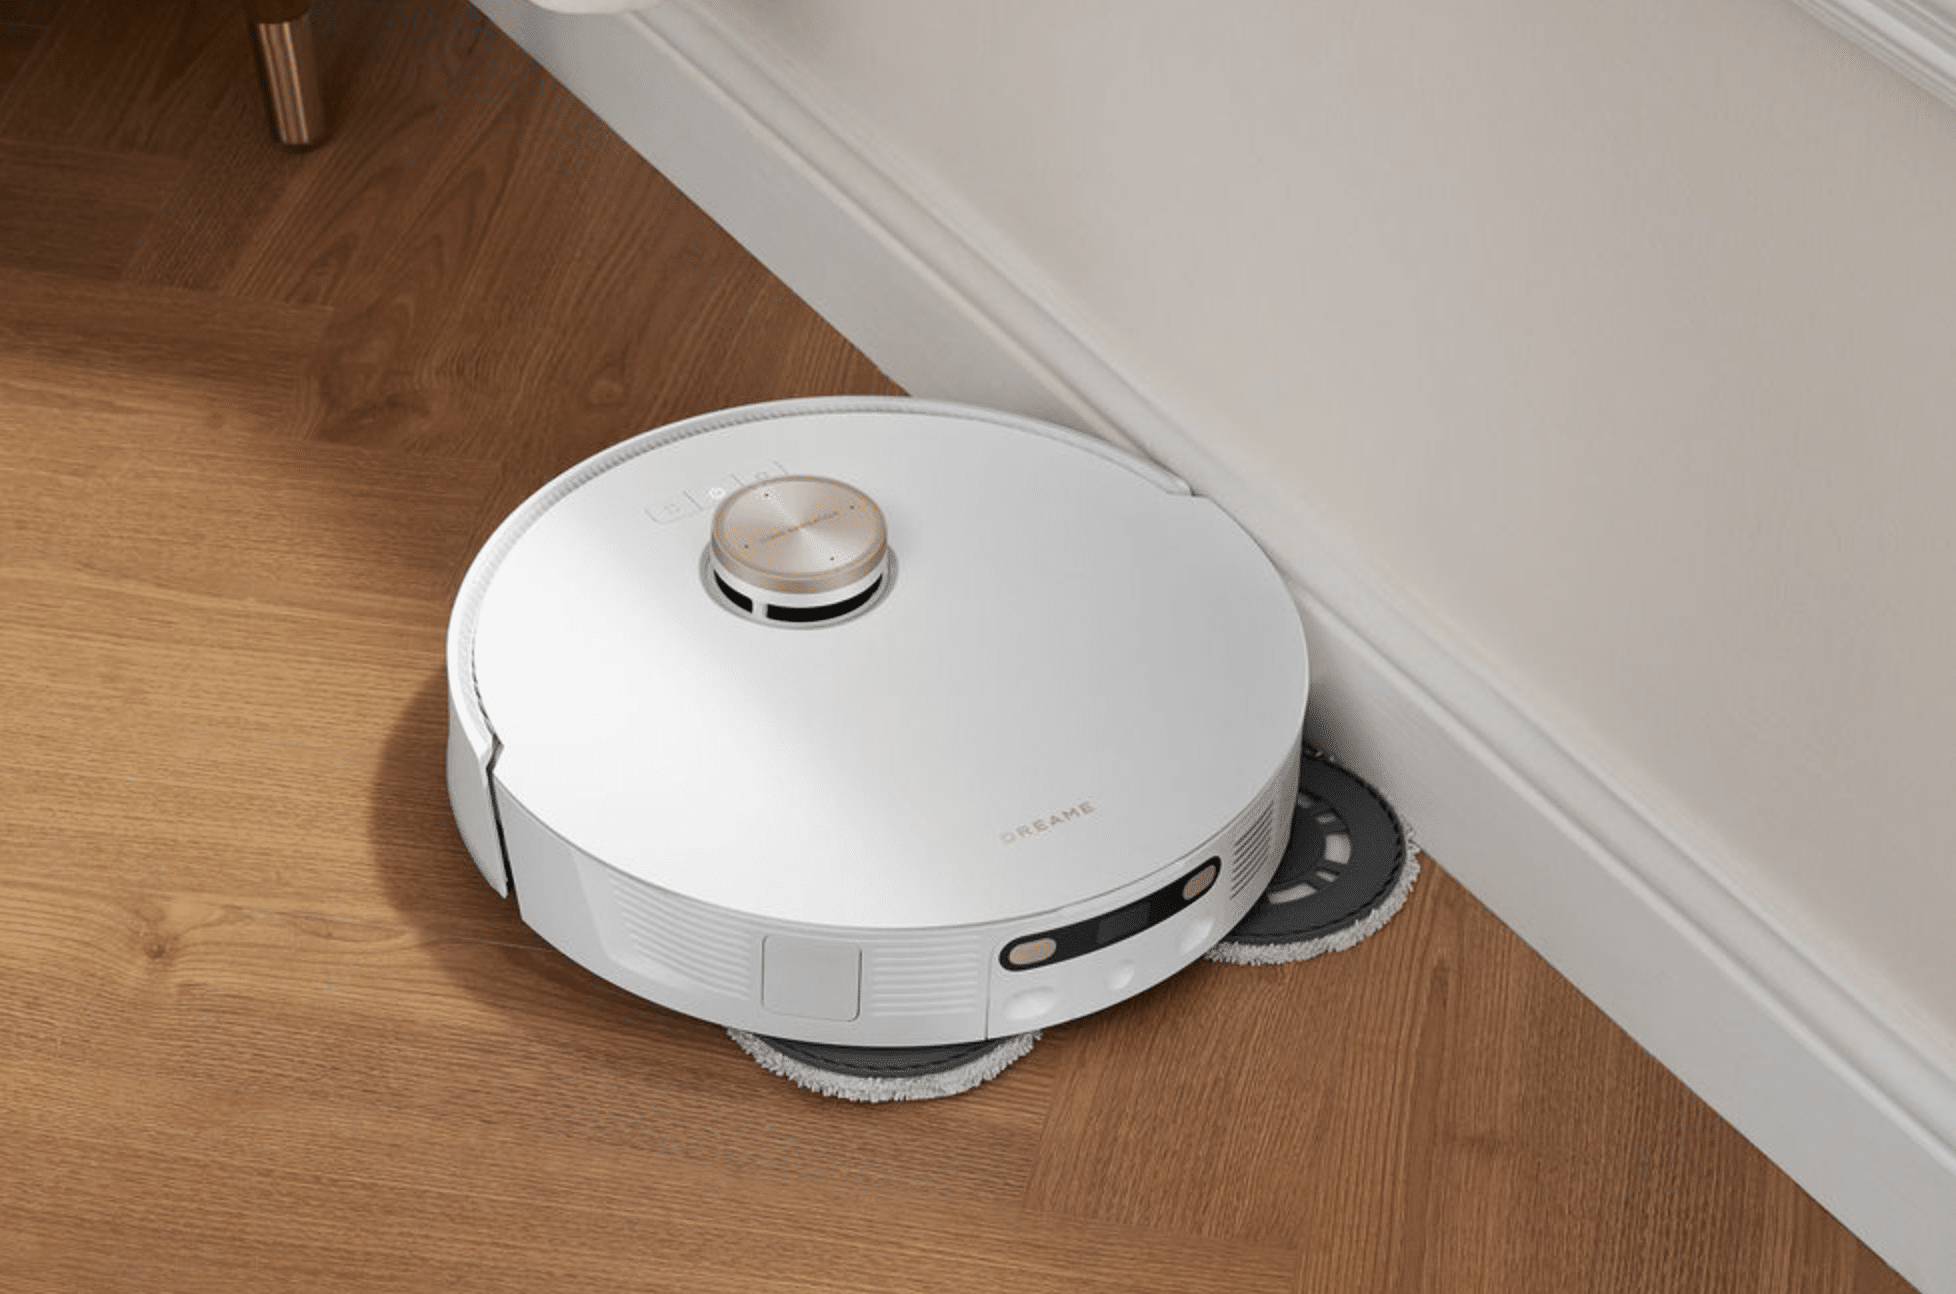 Dreamebot L20 Ultra review: New features improve cleaning - Tech